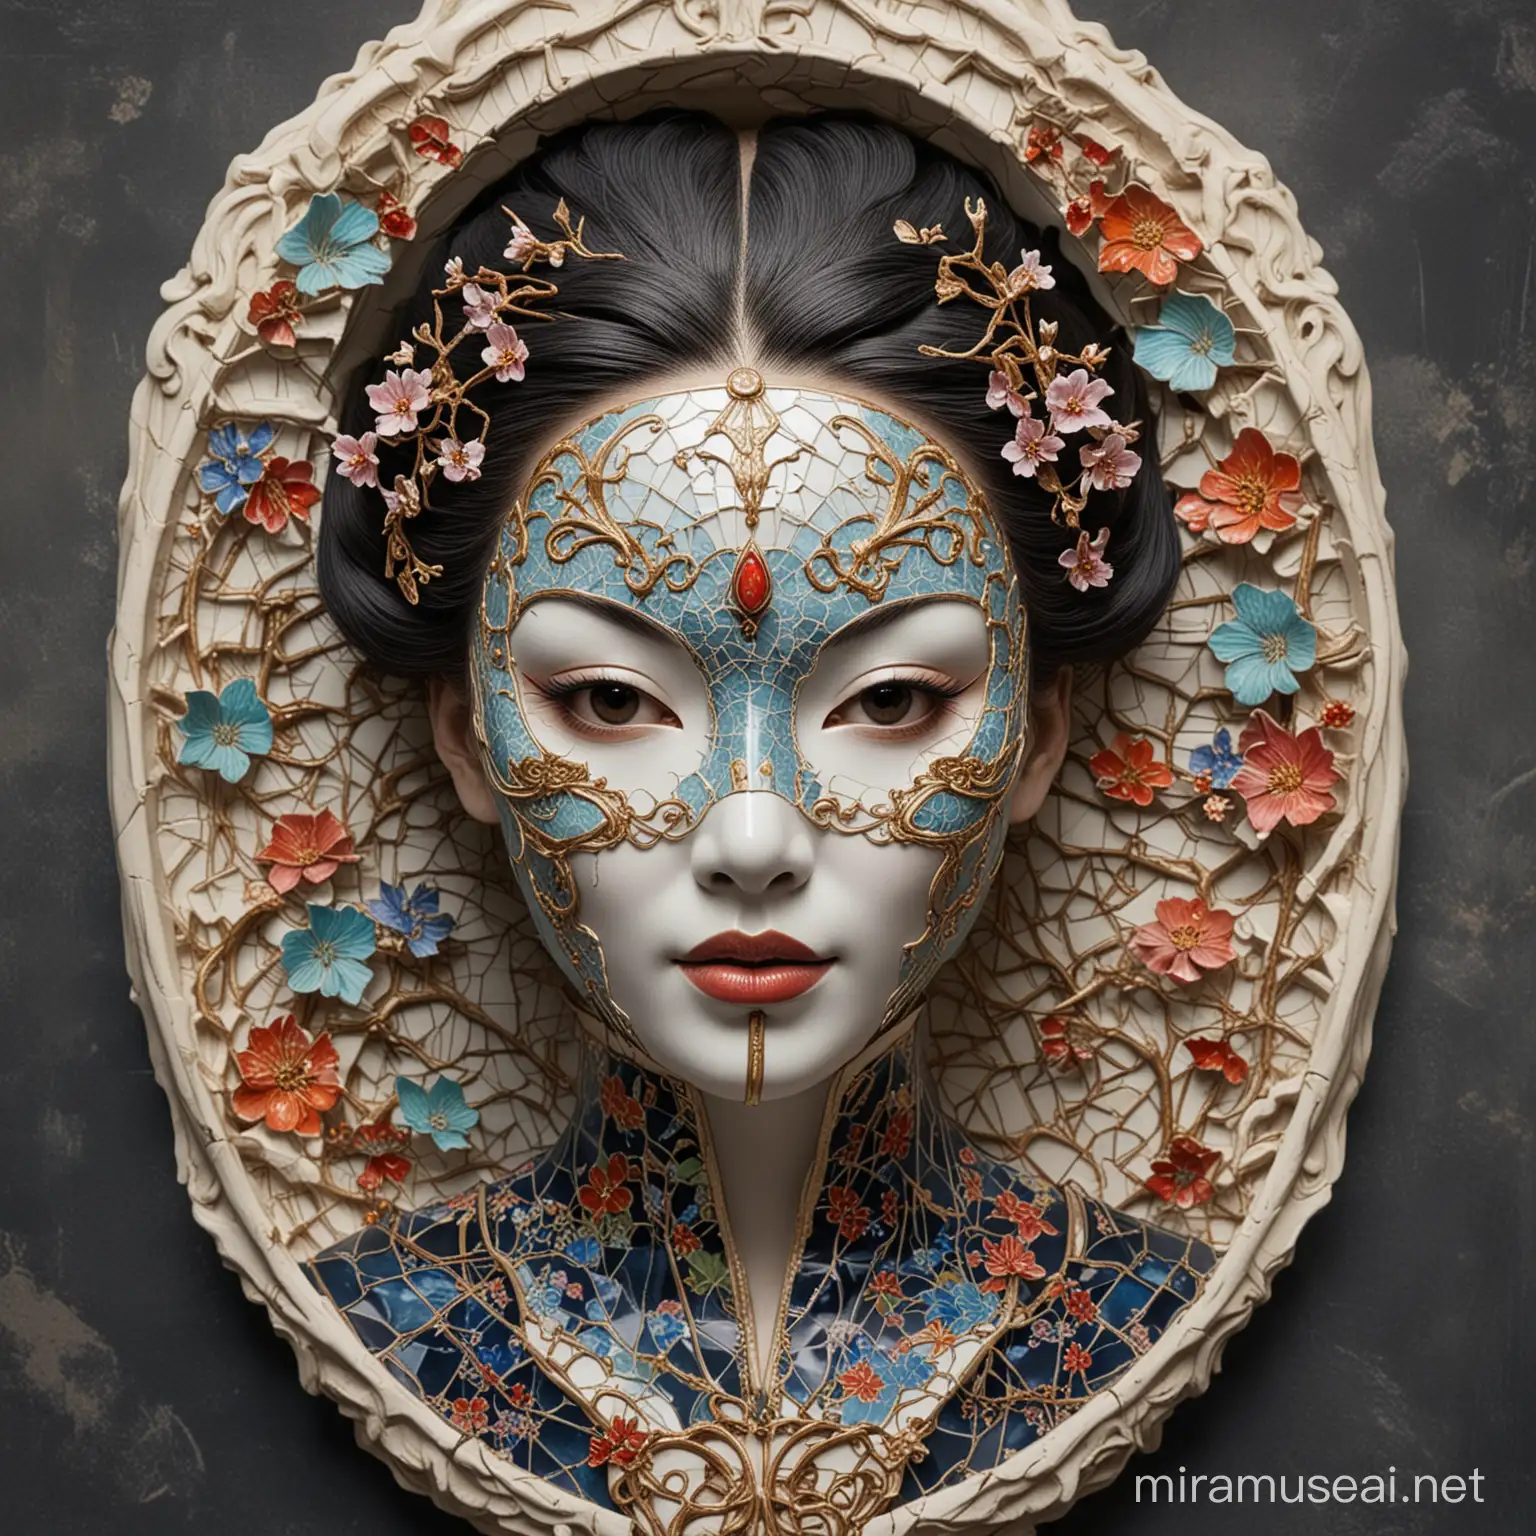 Colorful Art Nouveau Style Japanese Woman in Cracked Porcelain Mask amidst Mystical Worlds